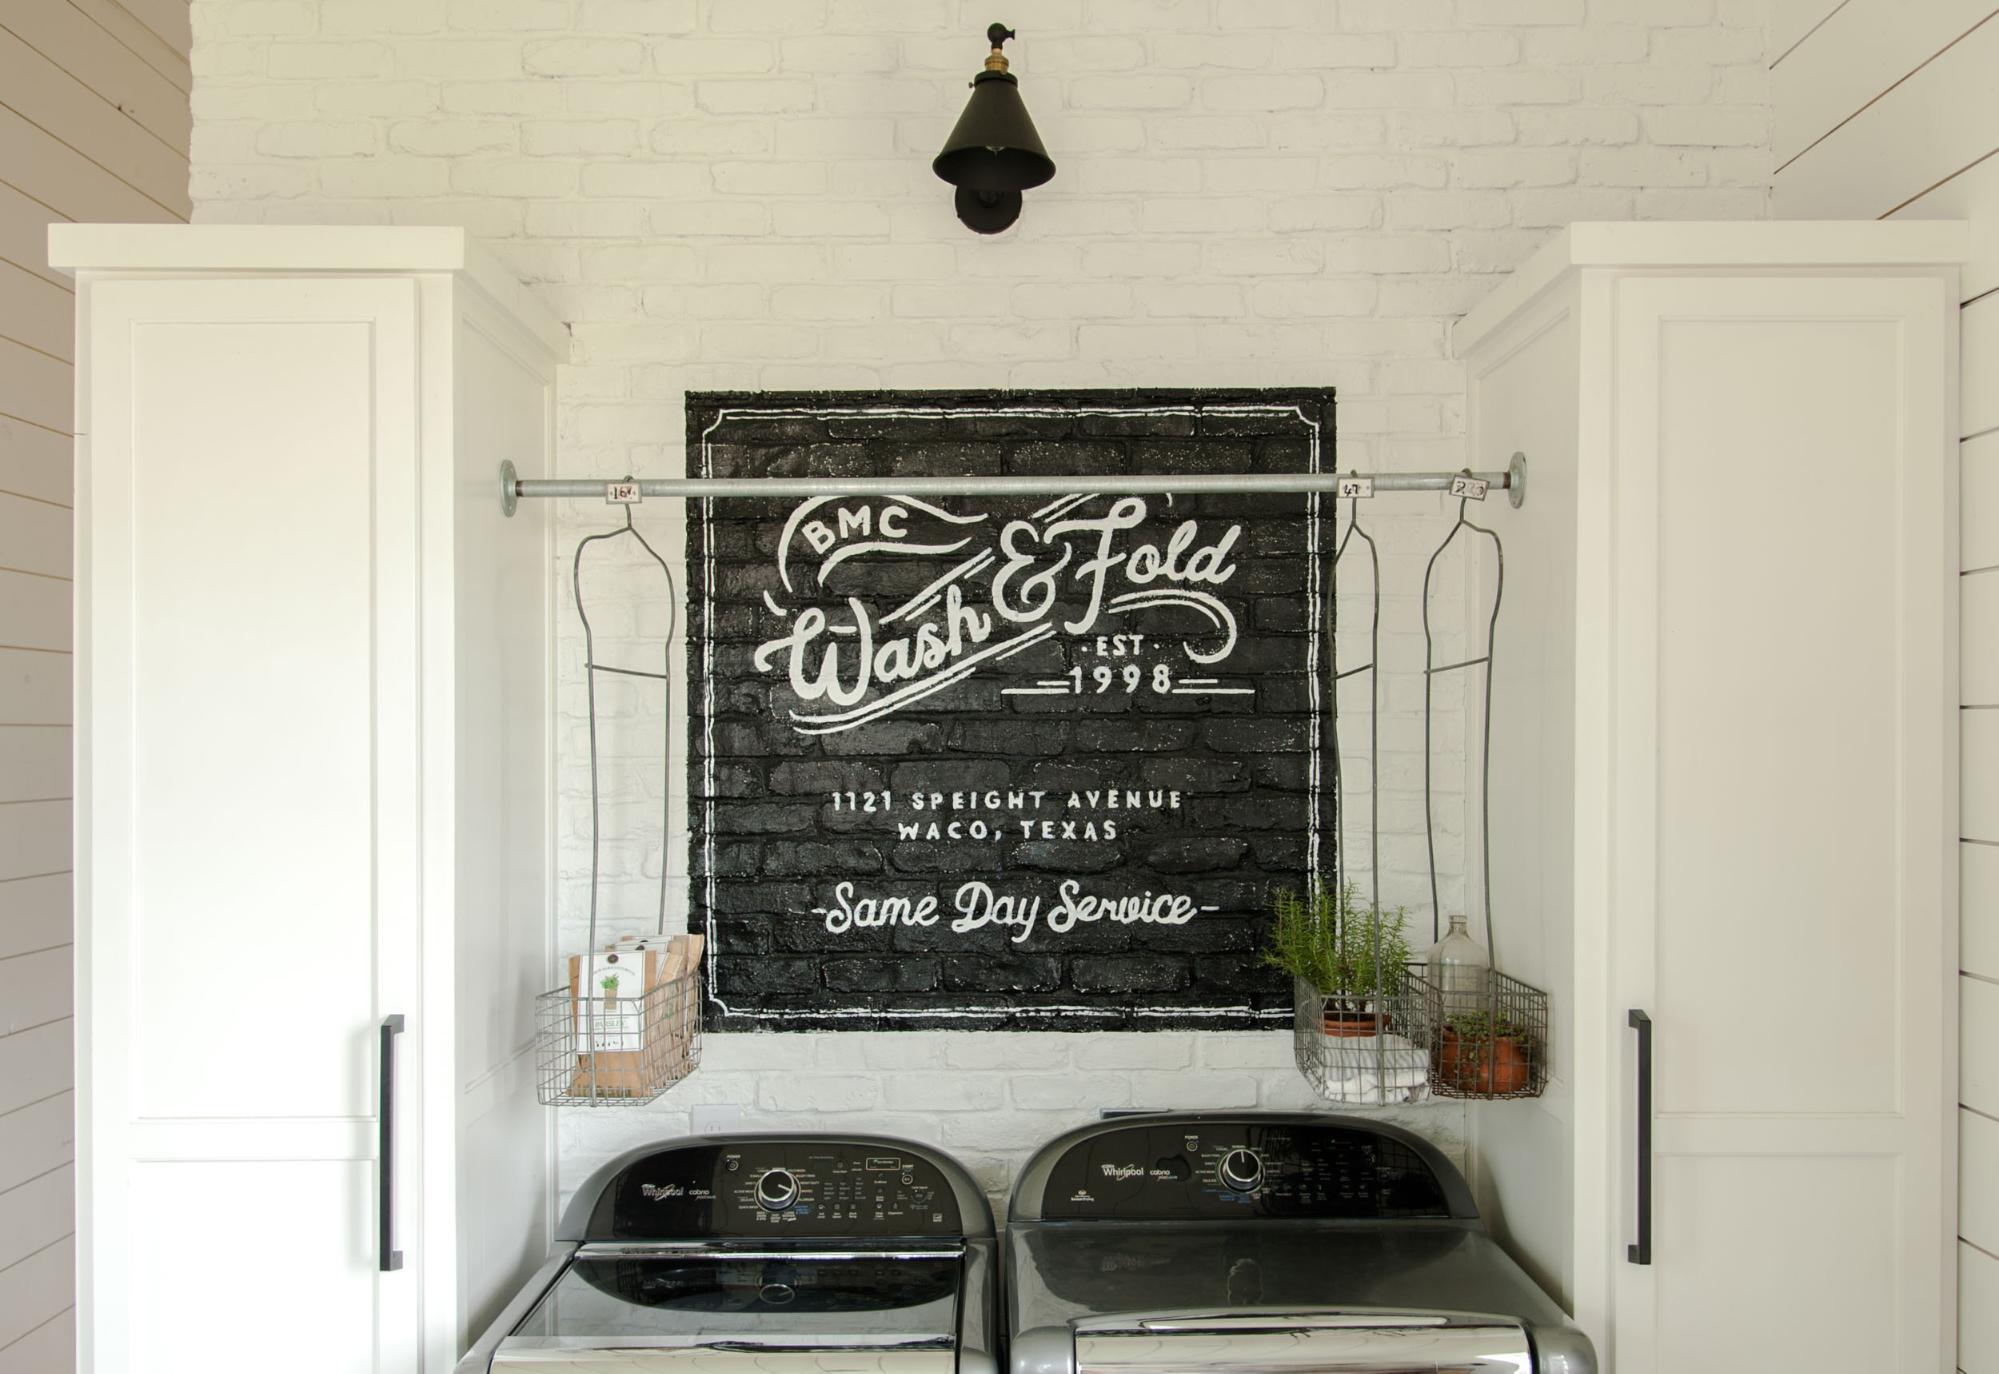 Chip and Joanna Gaines' laundry room